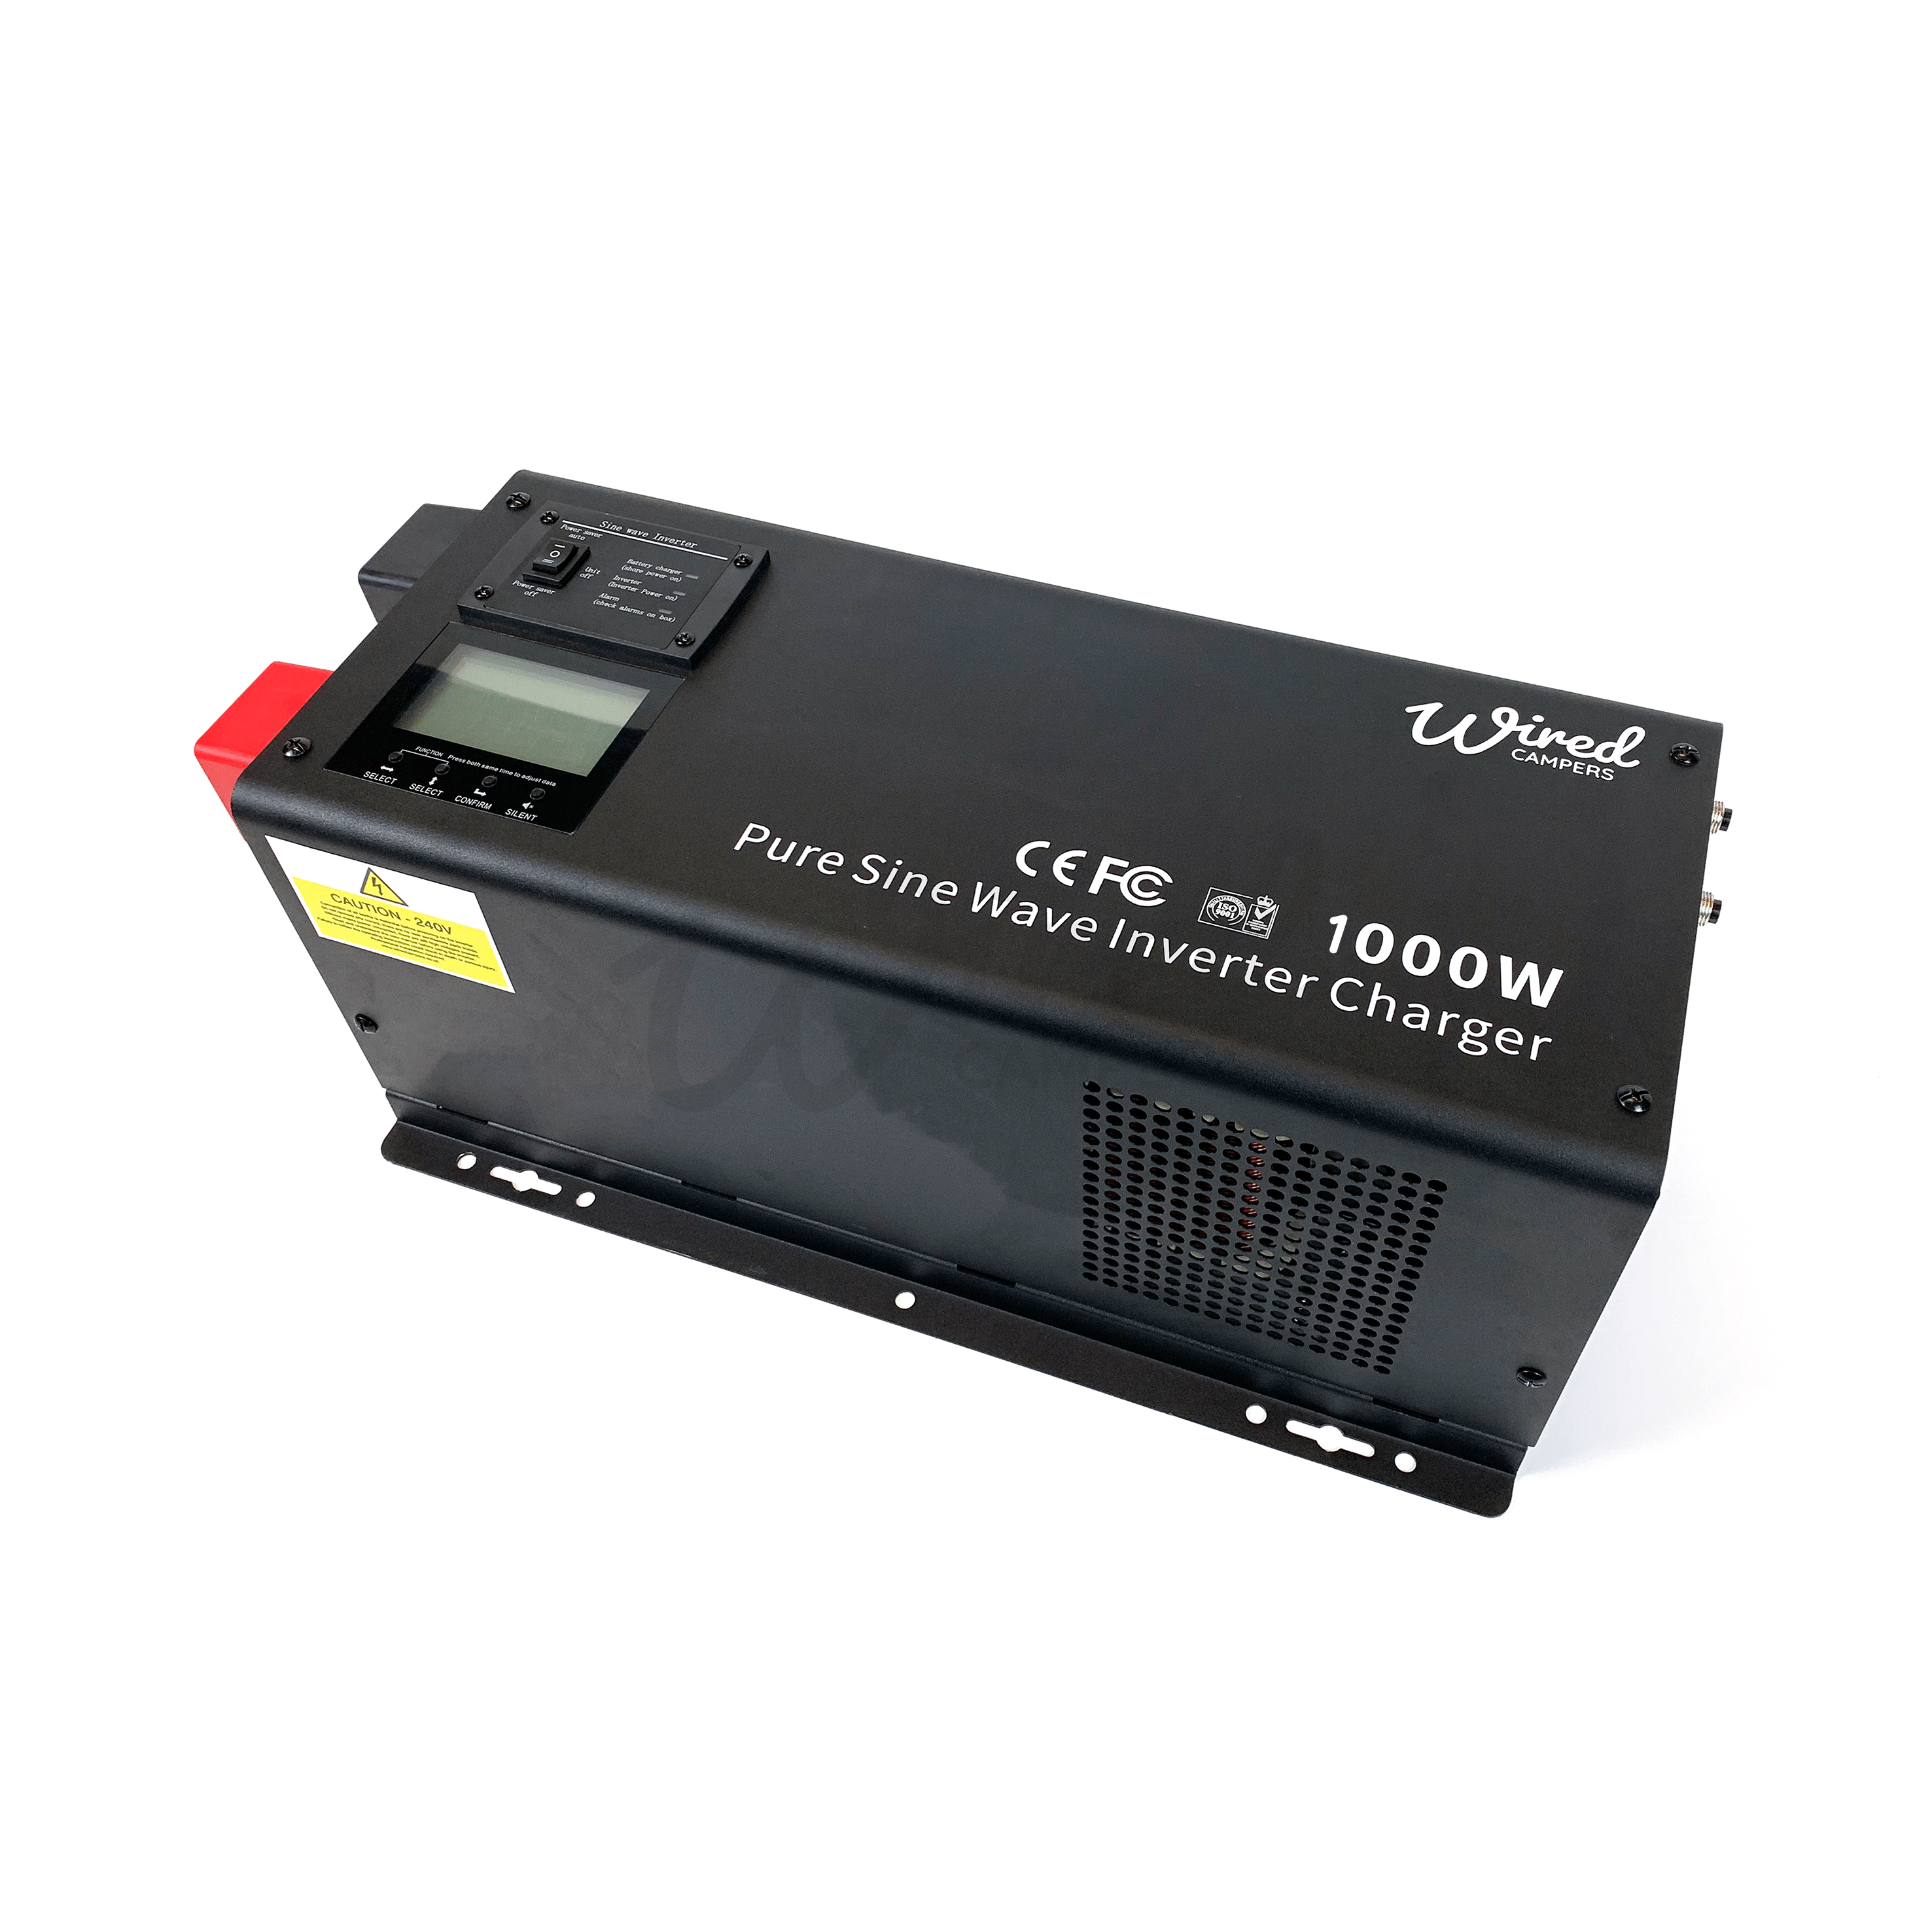 Wired Campers Limited 1000W (1kW) Low Frequency Hard Wired 12V Inverter Charger - 240V 50HZ